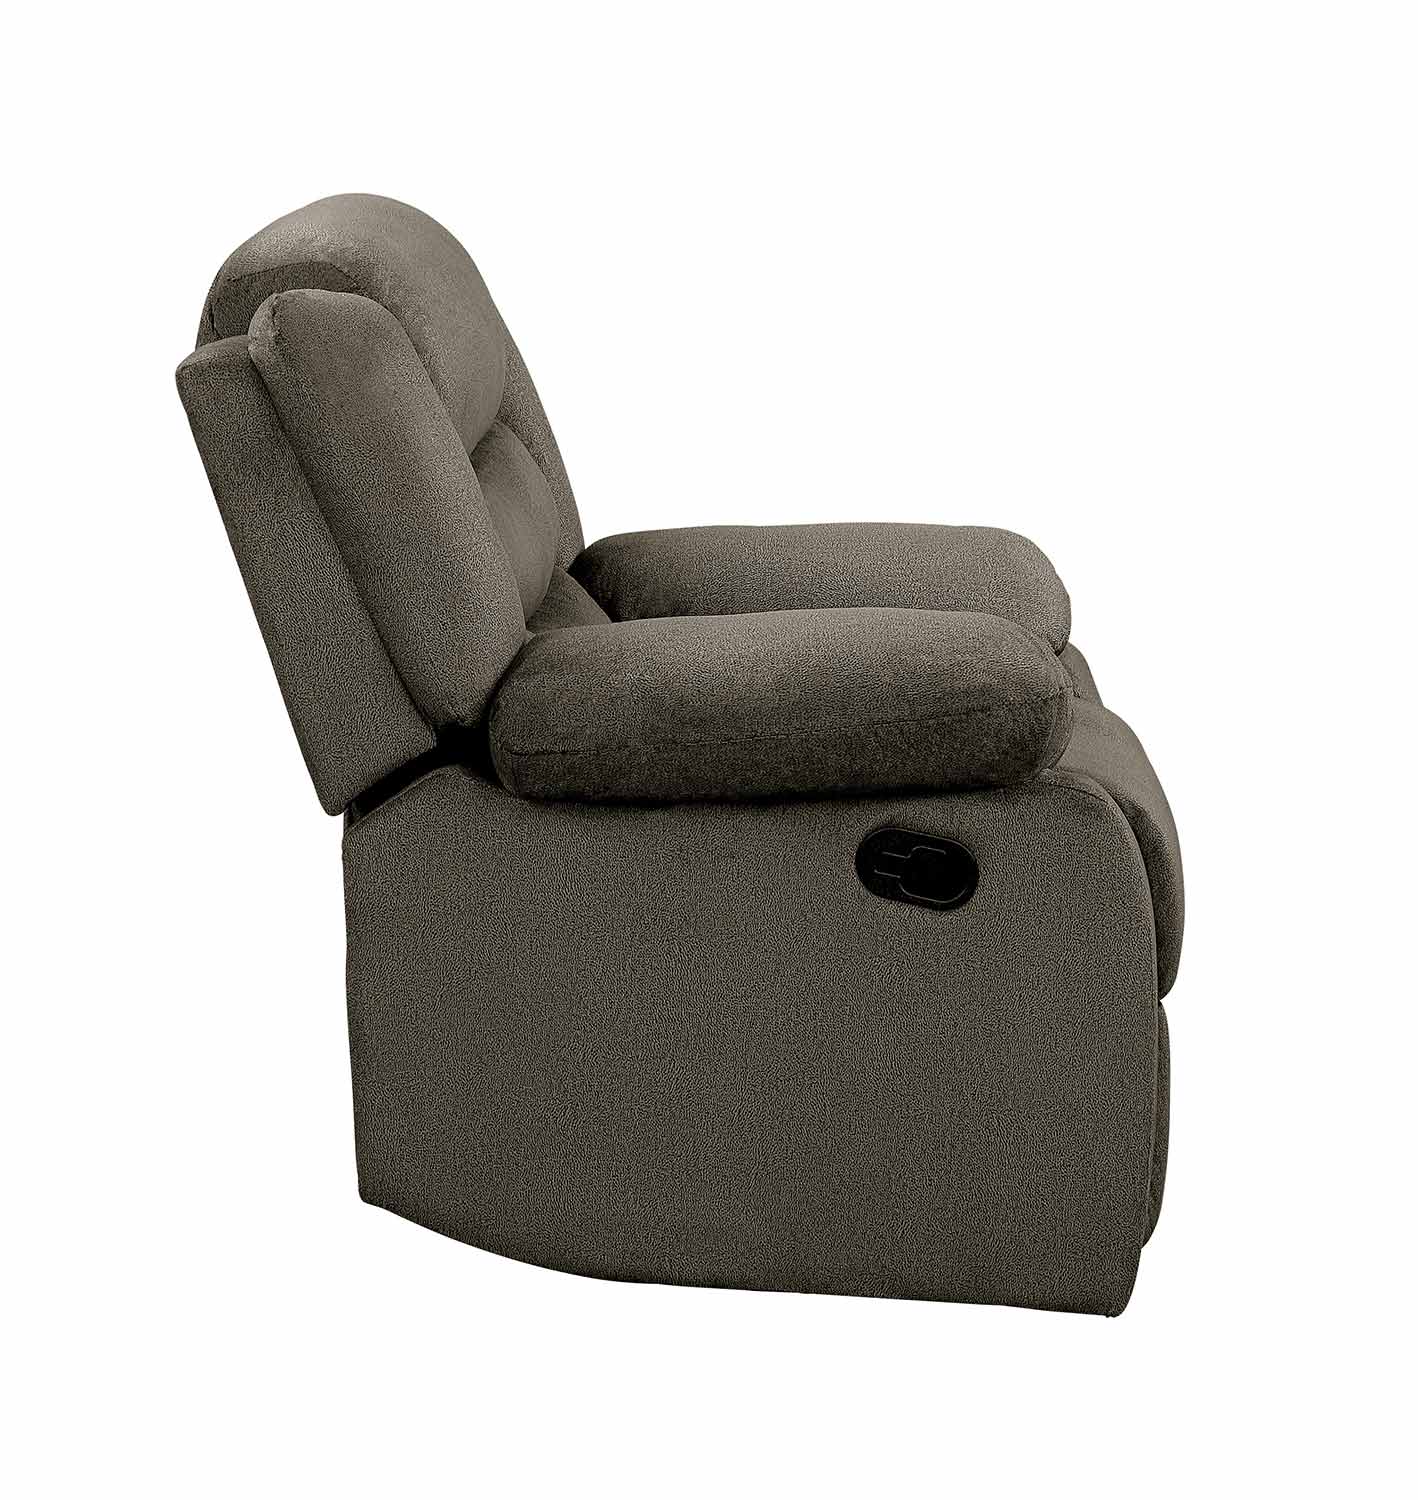 Homelegance Discus Reclining Chair - Brown